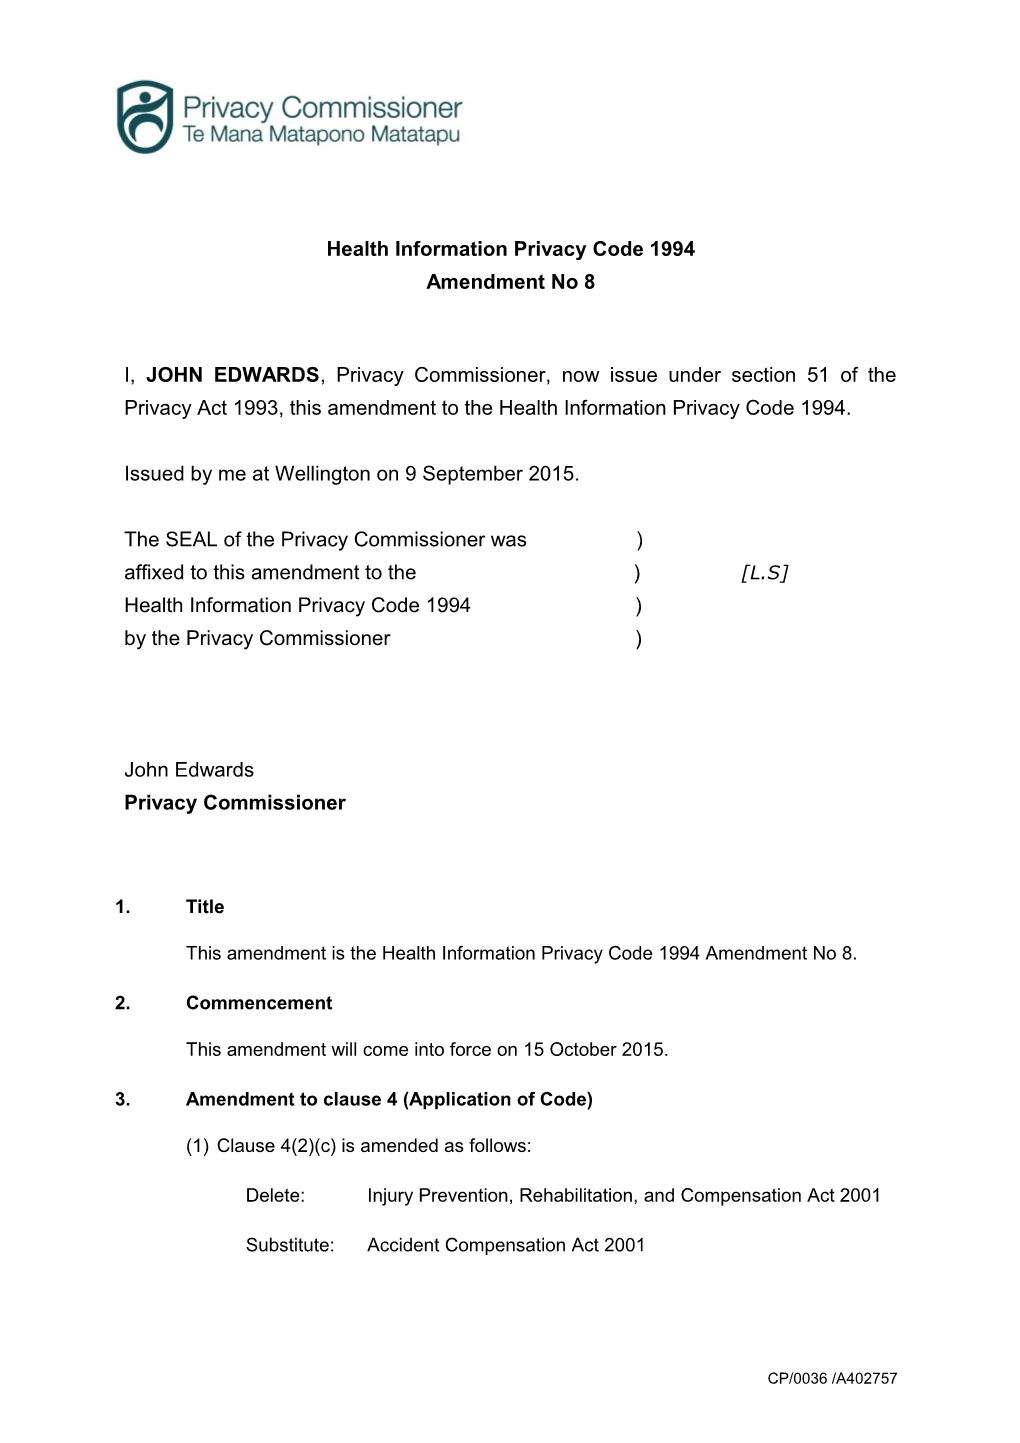 Health Information Privacy Code 1994